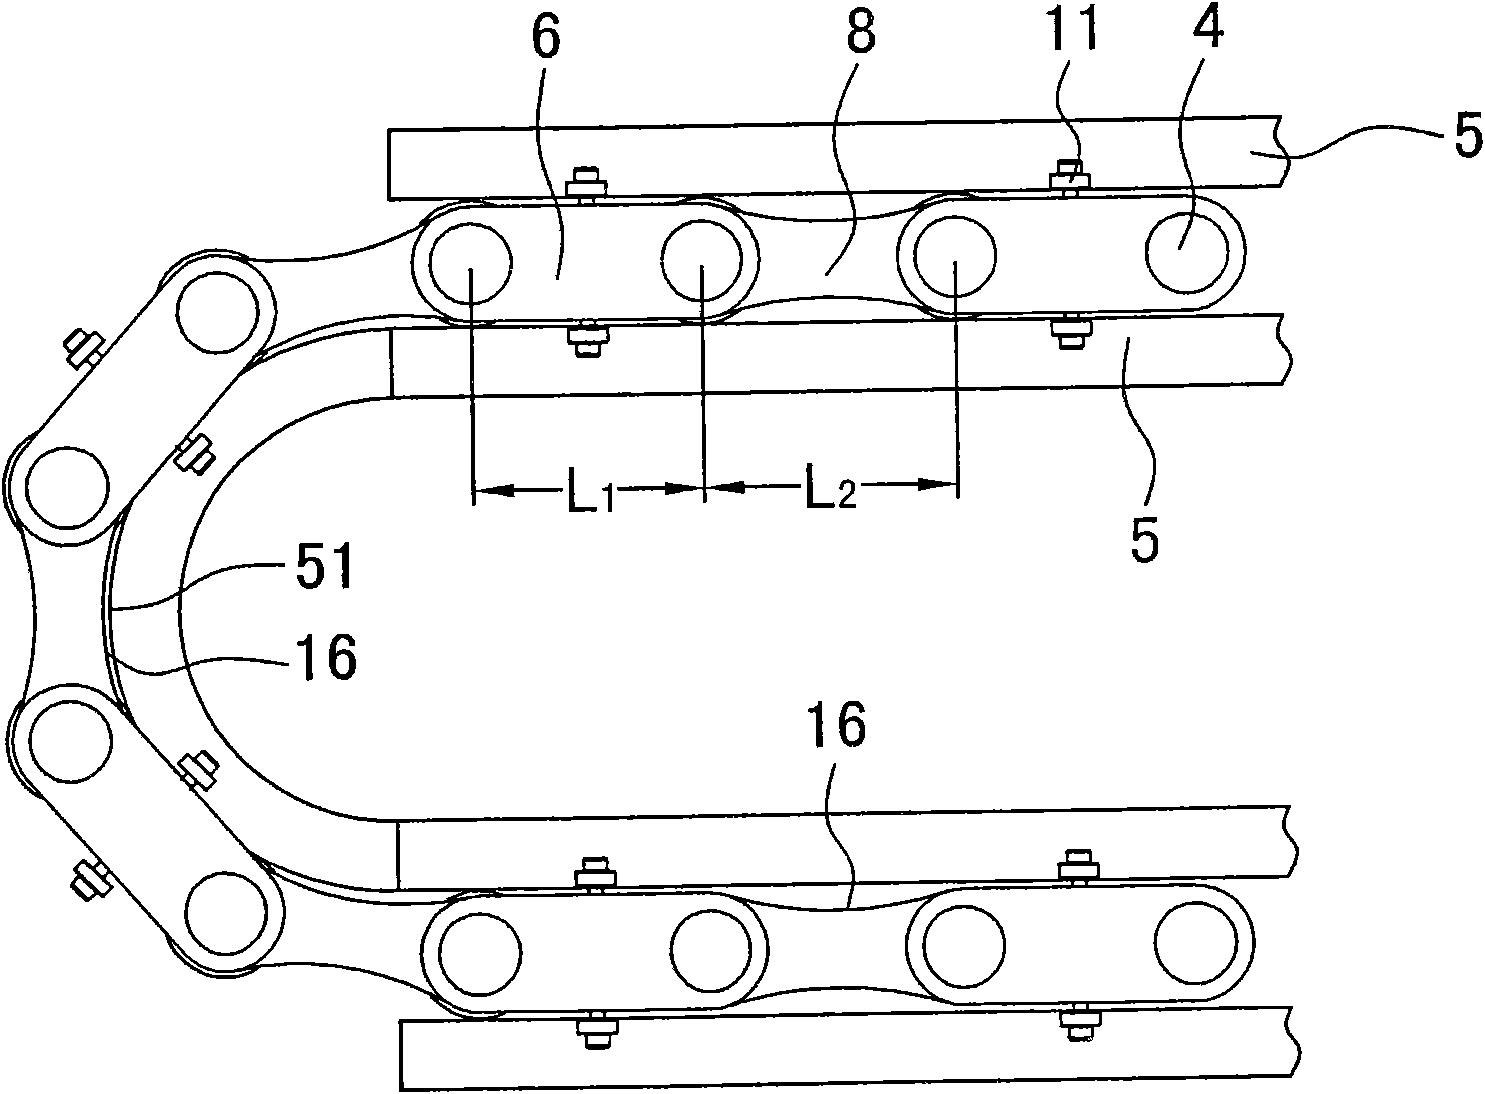 Variable pitch transport chain